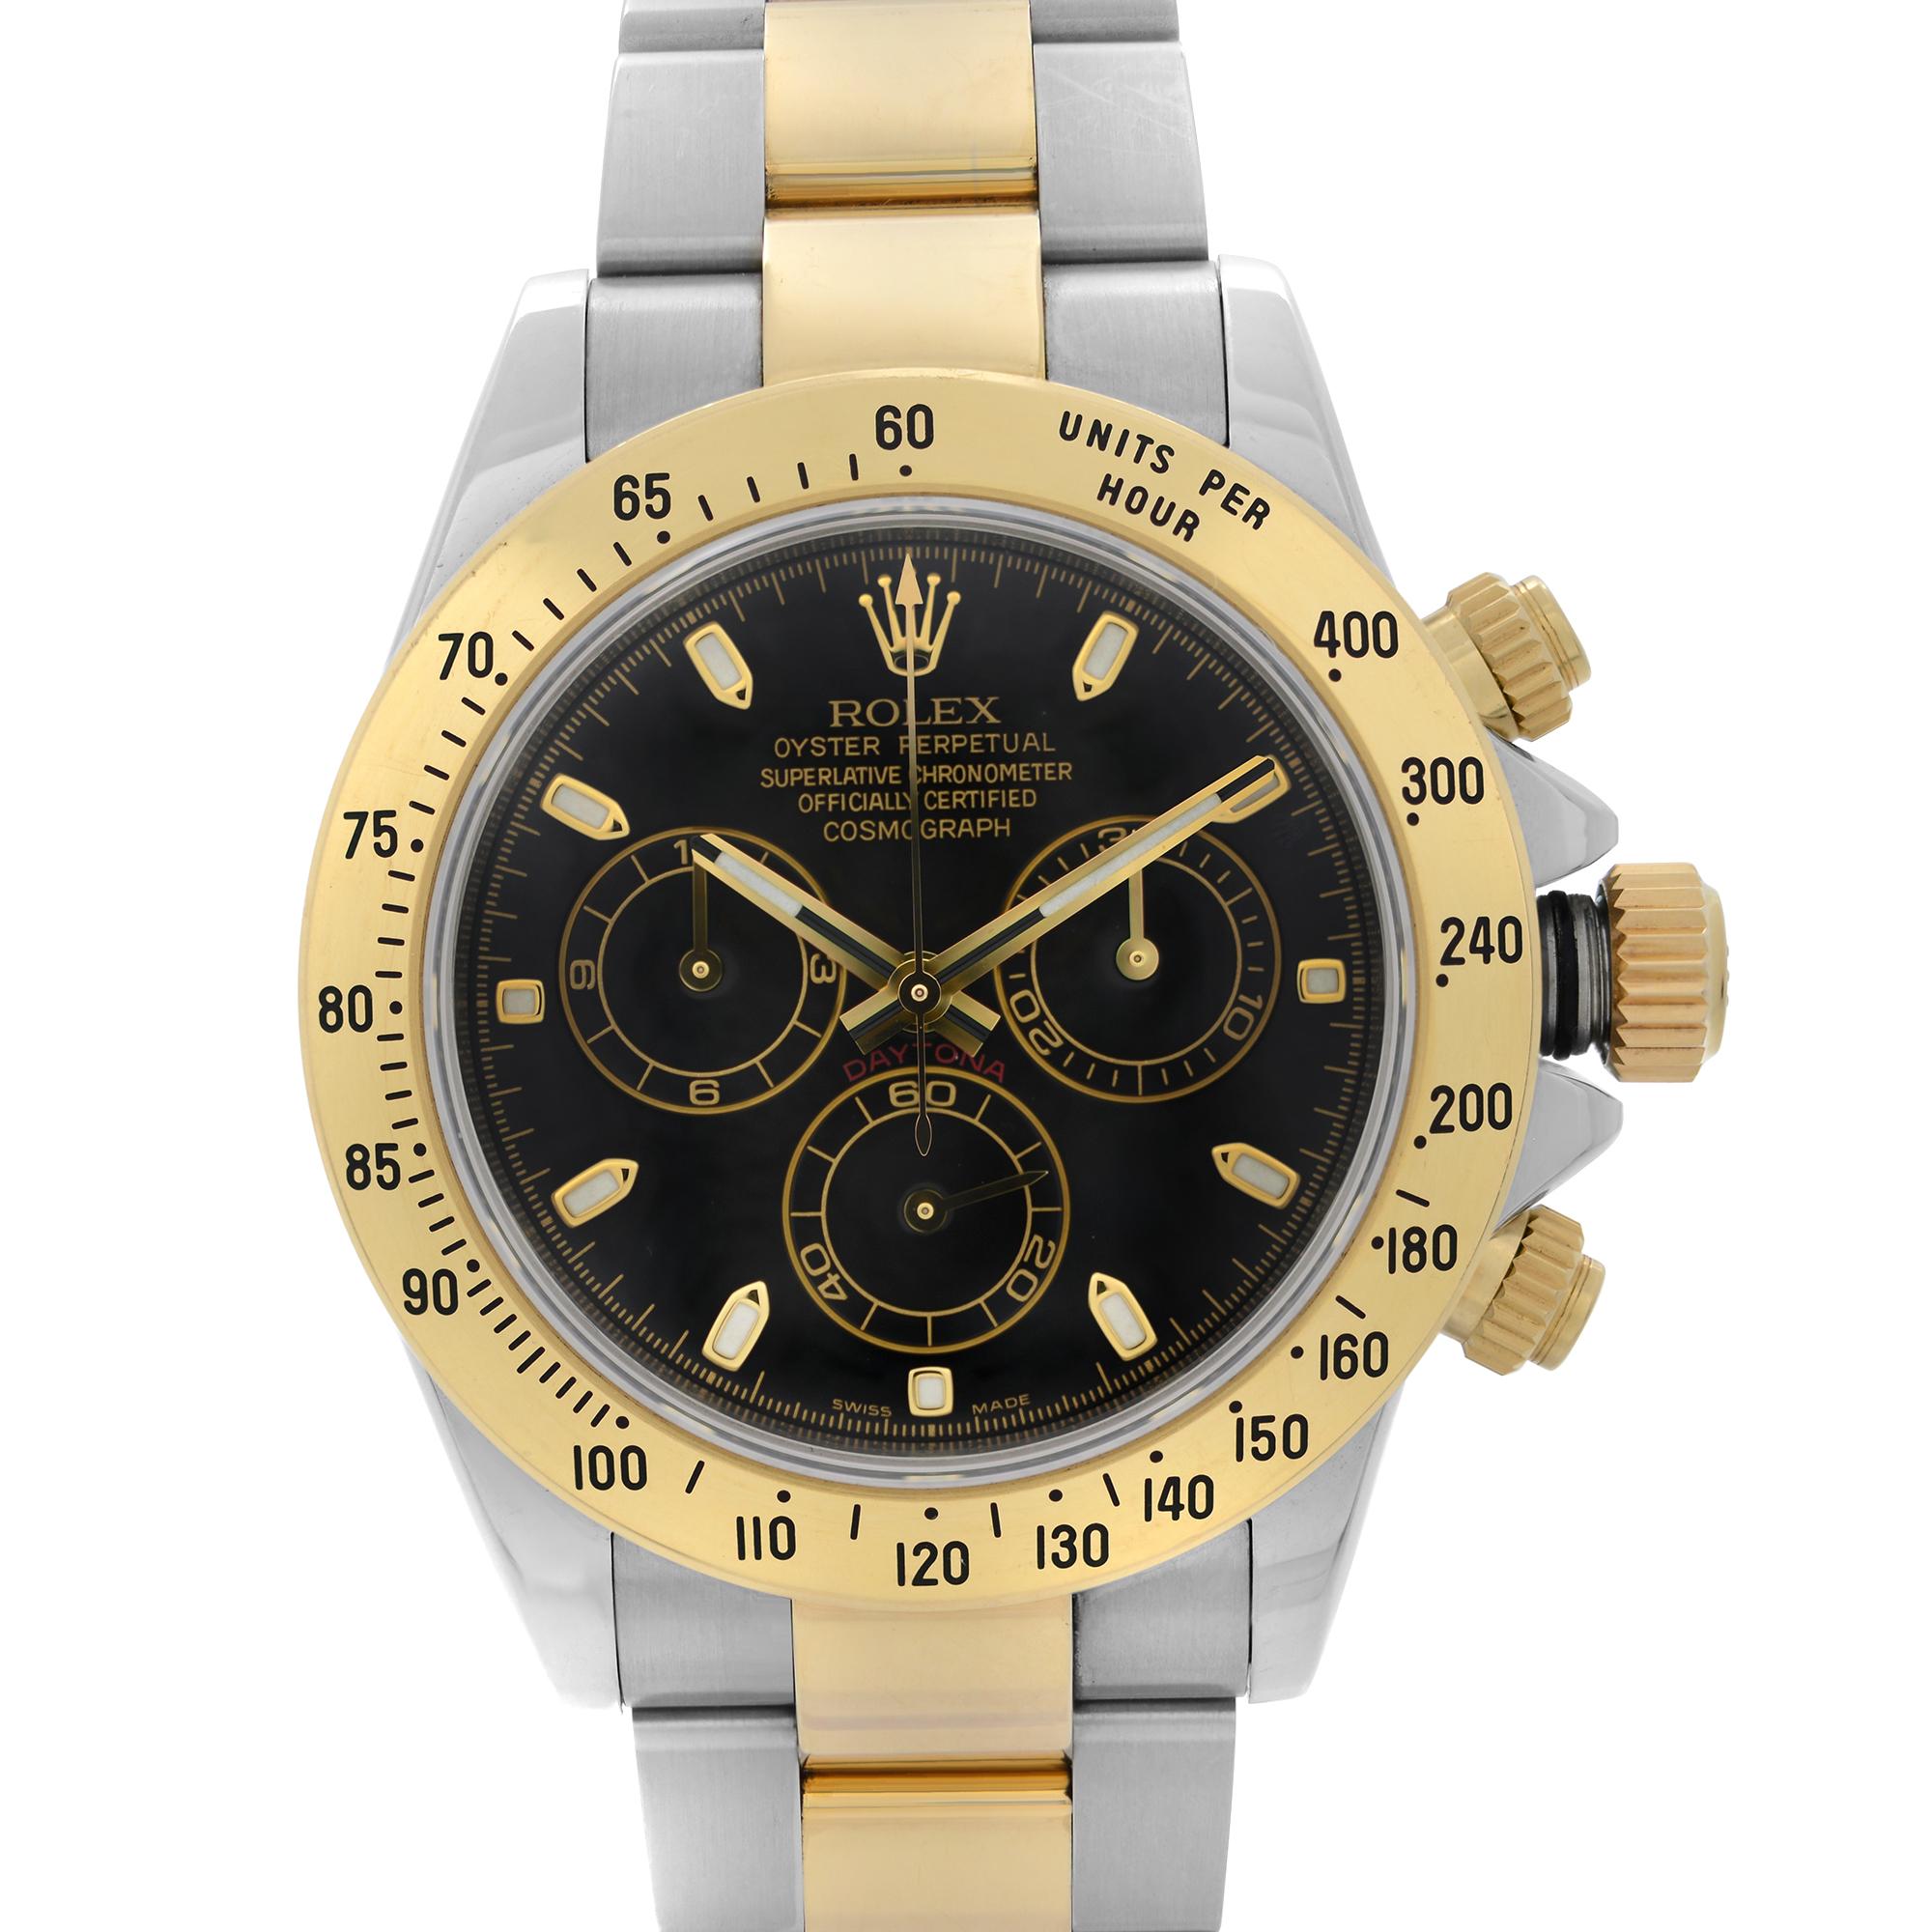 Pre-Owned Rolex Daytona 40 mm 18K Yellow Gold Stainless Steel Black Dial Automatic Men's Watch 116523. Open Name and Open Date card. Engraved V-series. The watch was produced in 2009.  New Style Buckle. The Watch is powered by an Automatic Movement